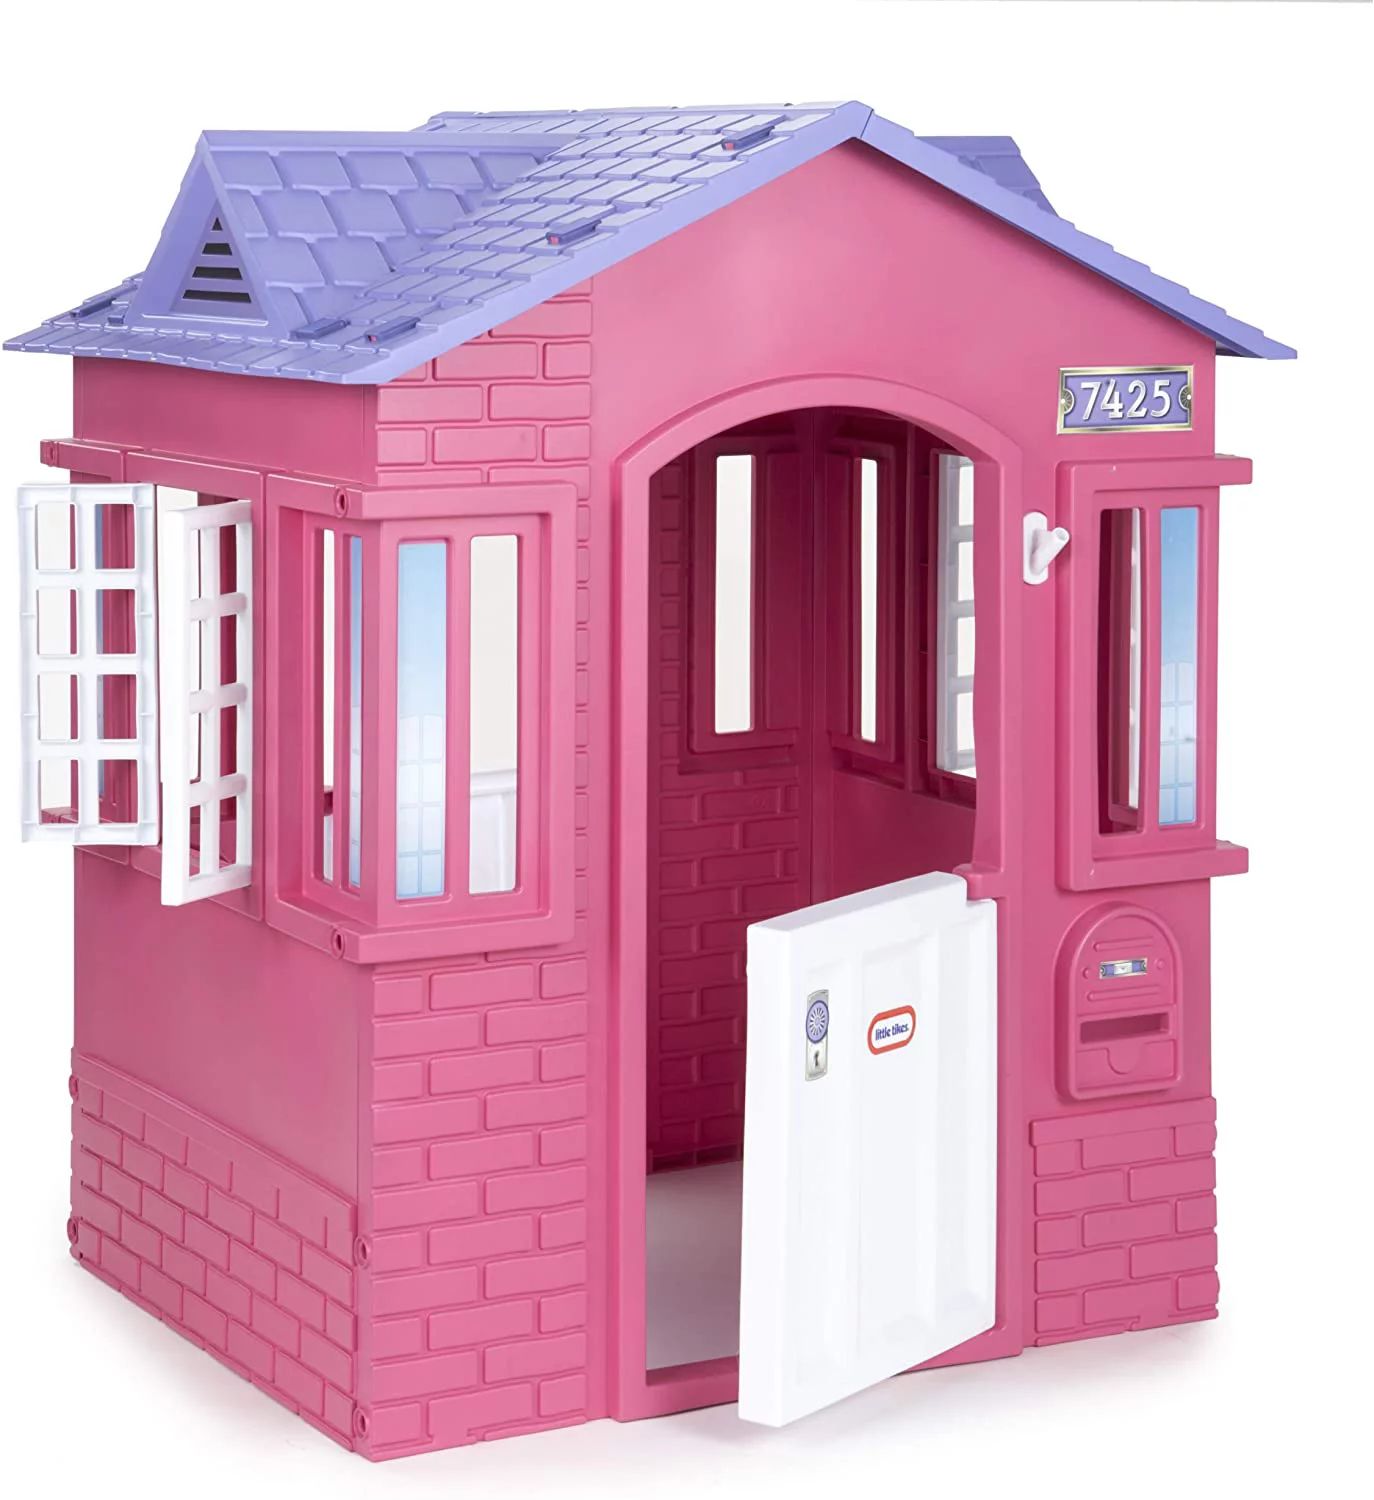 Little Tikes Cape Cottage House, Pink - Pretend Playhouse for Girls Boys Kids 2-8 Years Old - Wal... | Walmart (US)